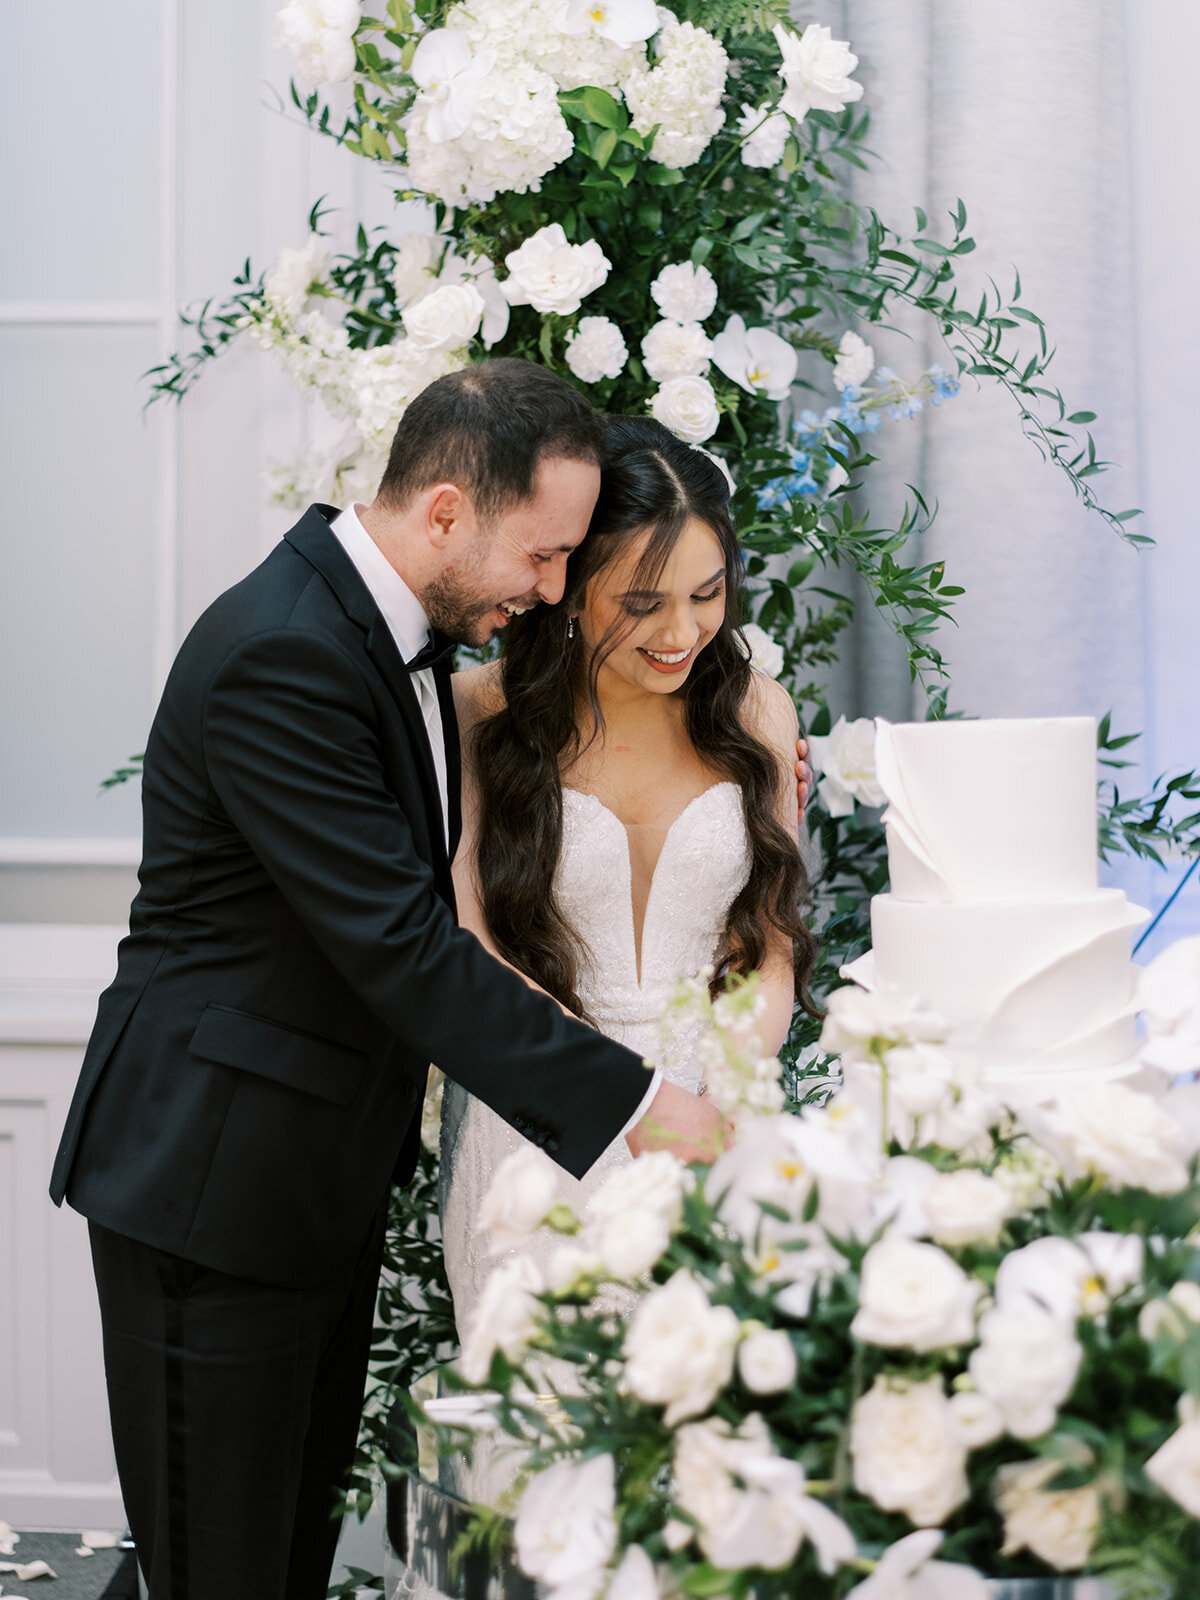 A bride and groom in formal attire smile as they cut a white, tiered wedding cake adorned with flowers, surrounded by white floral decorations at their destination wedding in Canada.